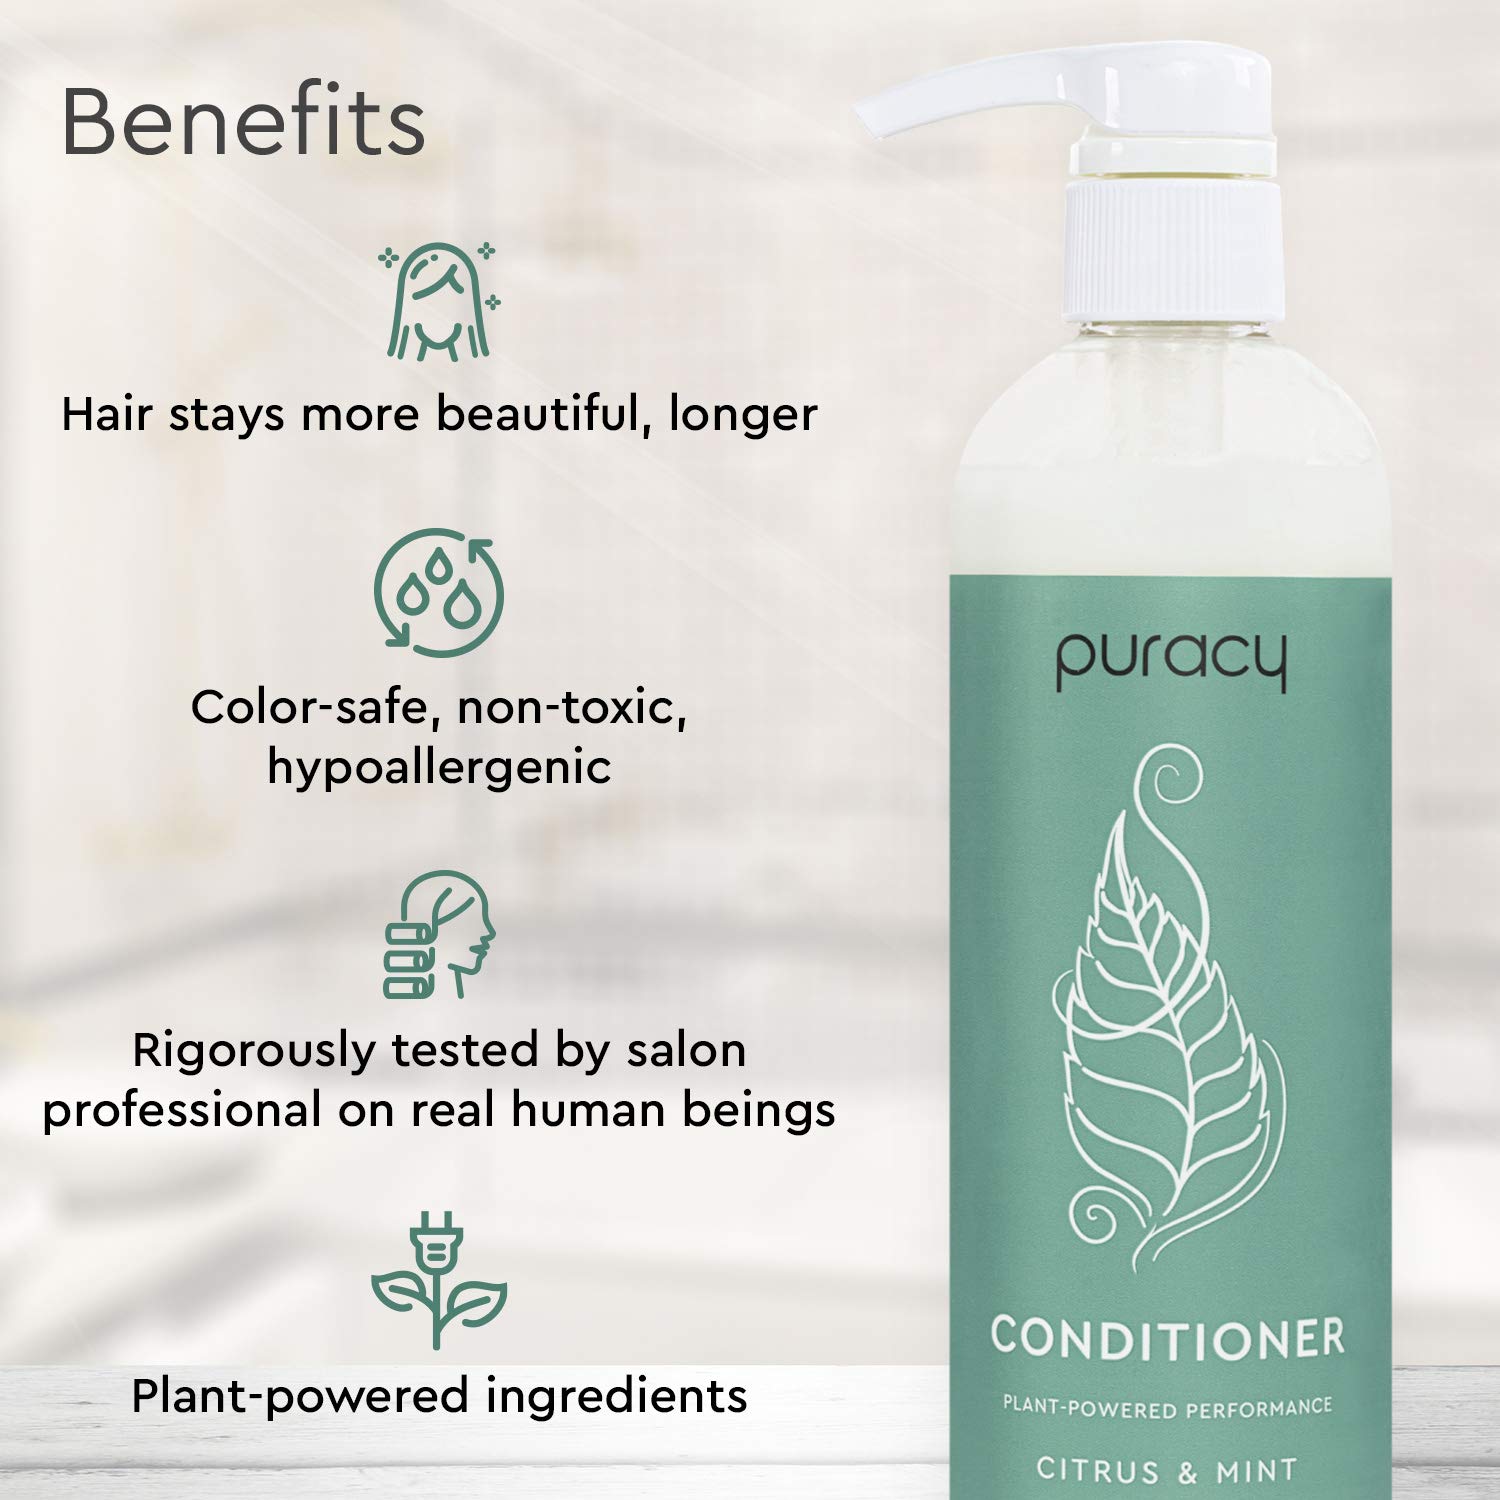 Puracy Conditioner, The Best Hair Days for Fine, Medium, and Color-Treated Hair, Perfect Hair from Pure Ingredients, Hair Stays Cleaner & Silkier Longer, 99.3% Natural Conditioner, 12 Ounce